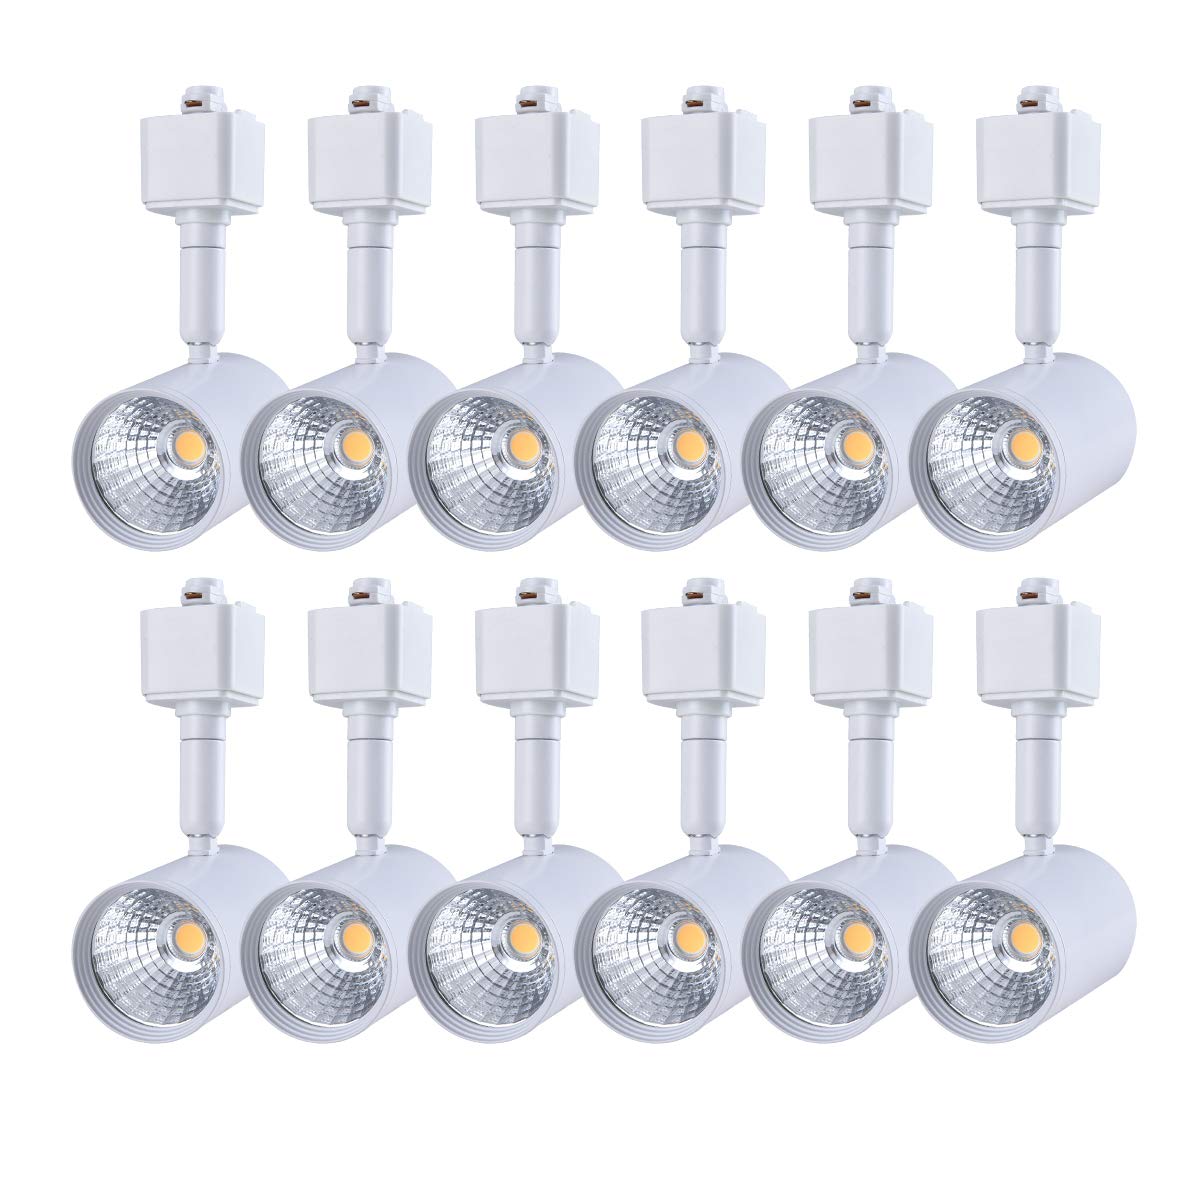 mirrea 12 Pack LED Track Lighting Heads Compatible with Single Circuit H Type Rail Ceiling Spotlight for Accent Task Wall Art Exhibition Lighting 6.5W White Painted (3000K Warm White)